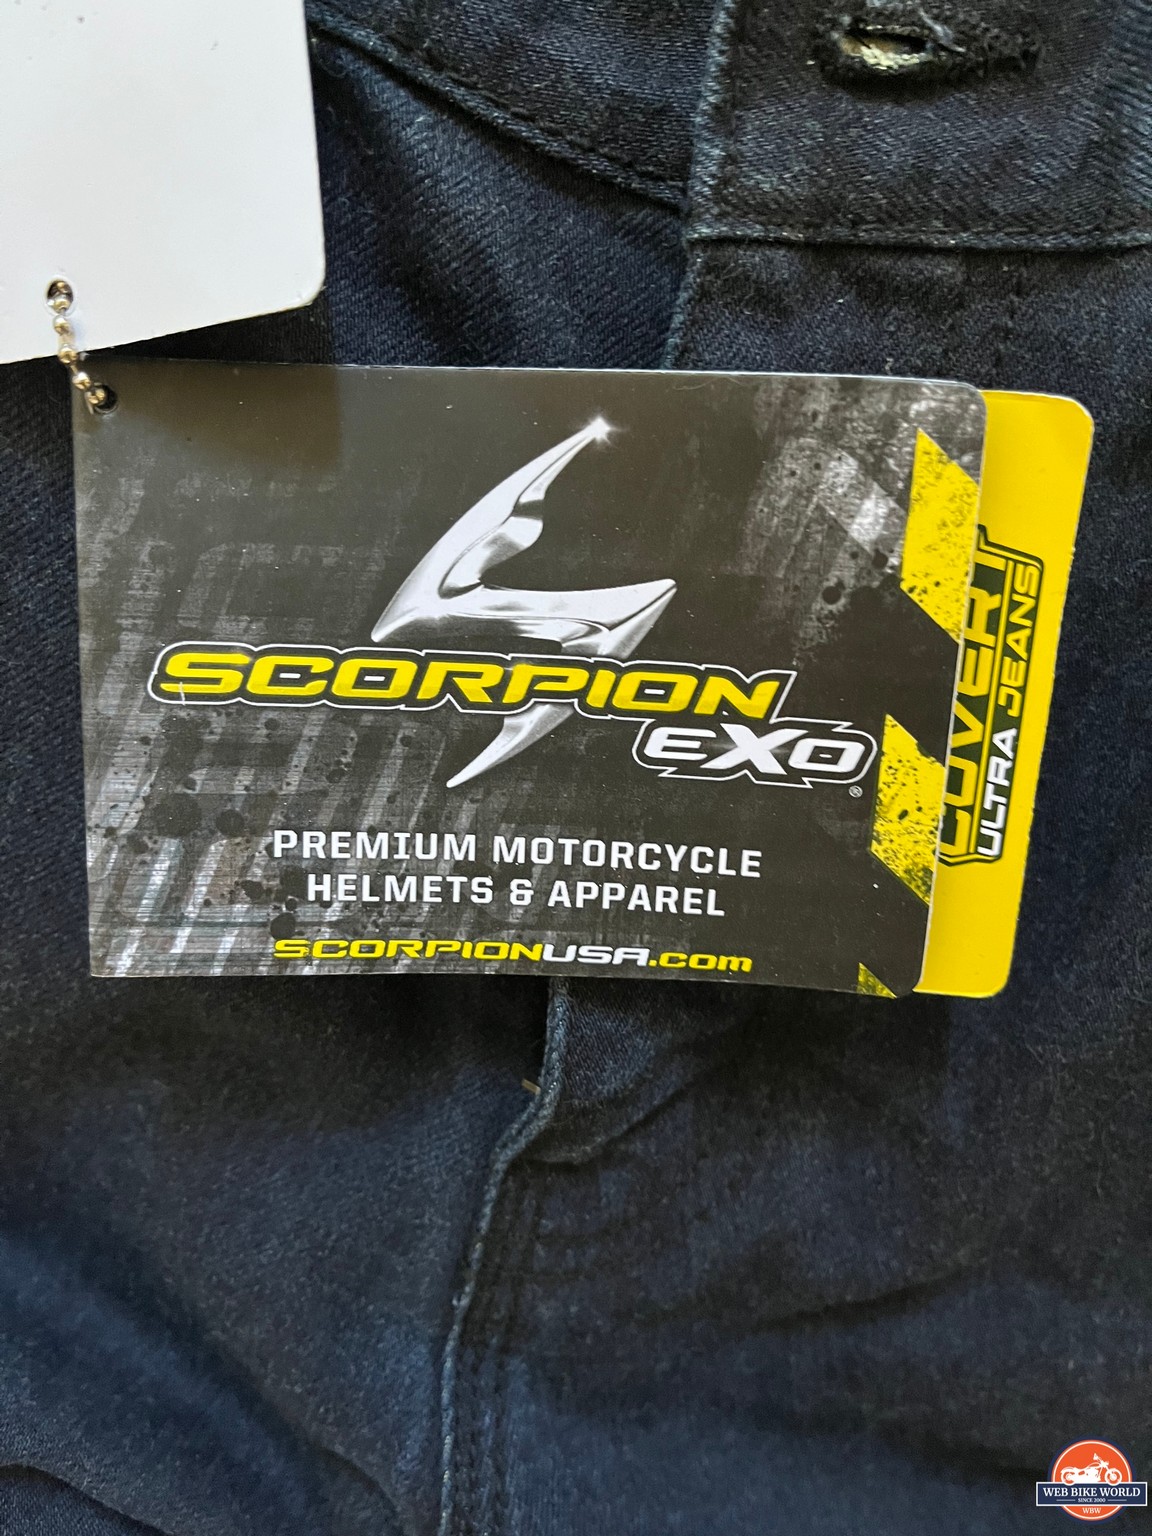 Scorpion EXO tag on Covert Ultra Jeans